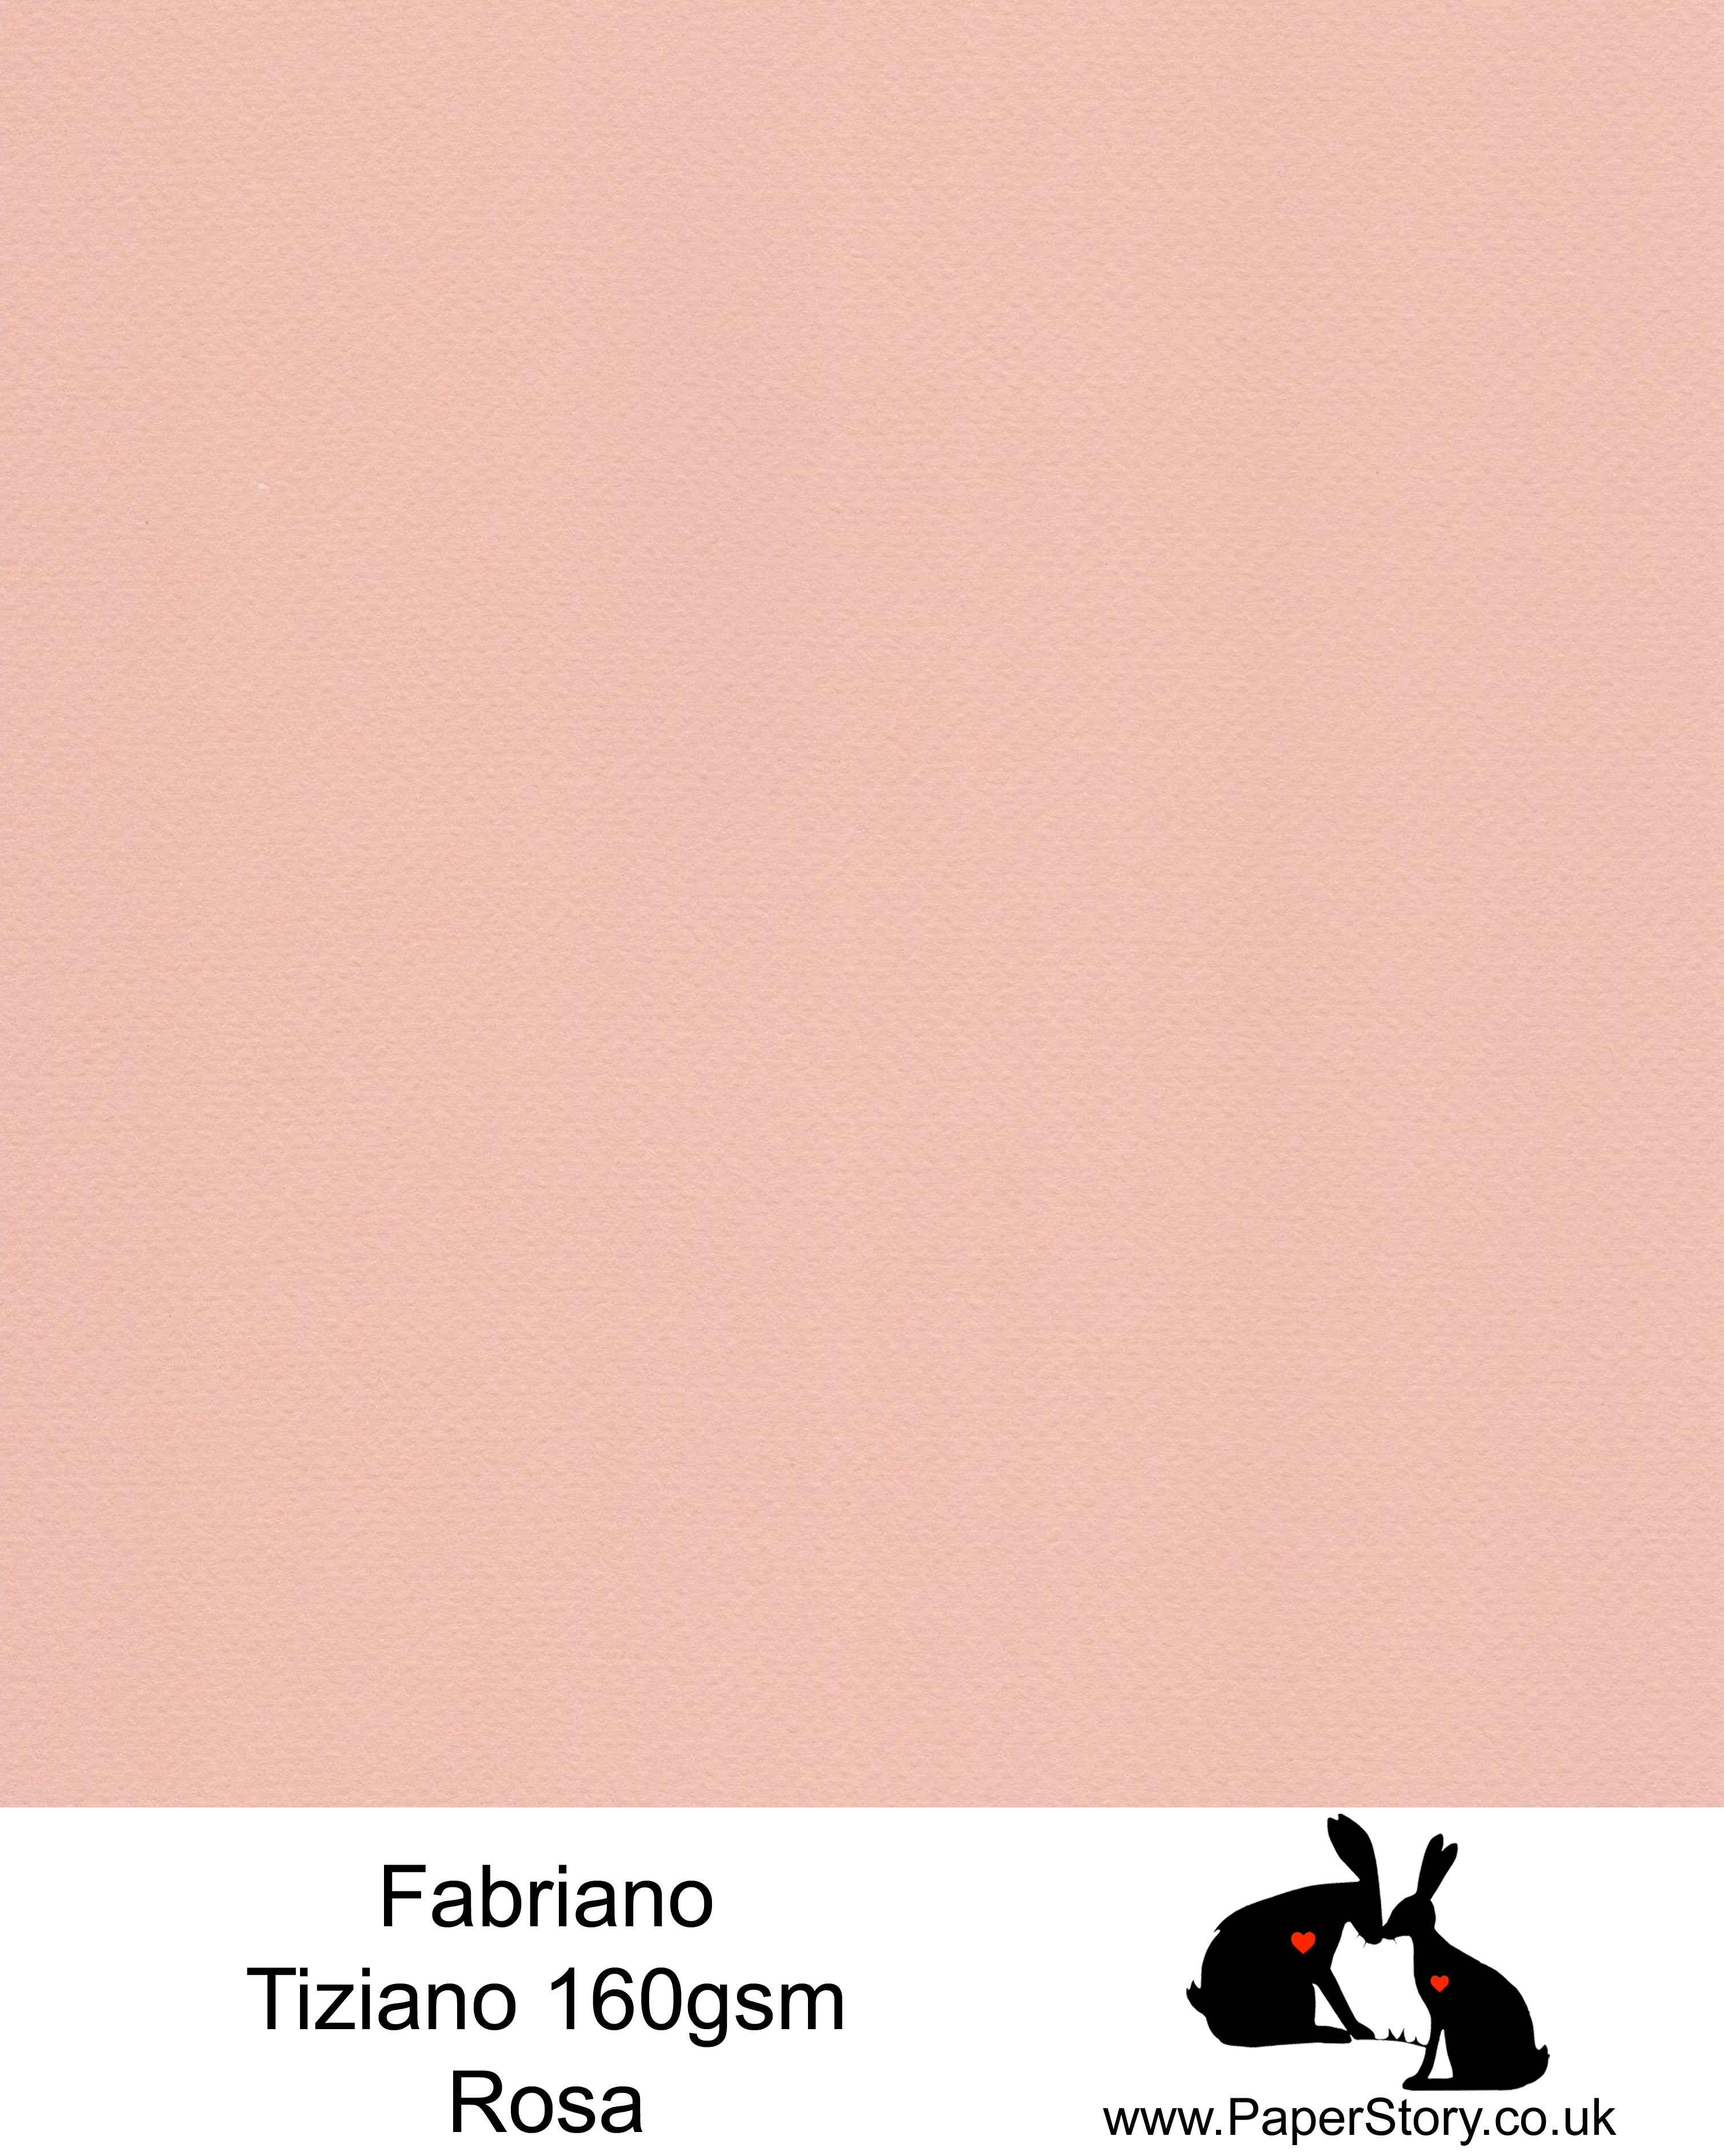 High quality paper from Italy, Rosa soft pink. Fabriano Tiziano is 160 gsm, Tiziano has a high cotton content, a textured naturally sized surface. This paper is acid free to guarantee long permanence in time, pH neutral. It has highly lightfast colours, an excellent surface making and sizing which make this paper particularly suitable for papercutting